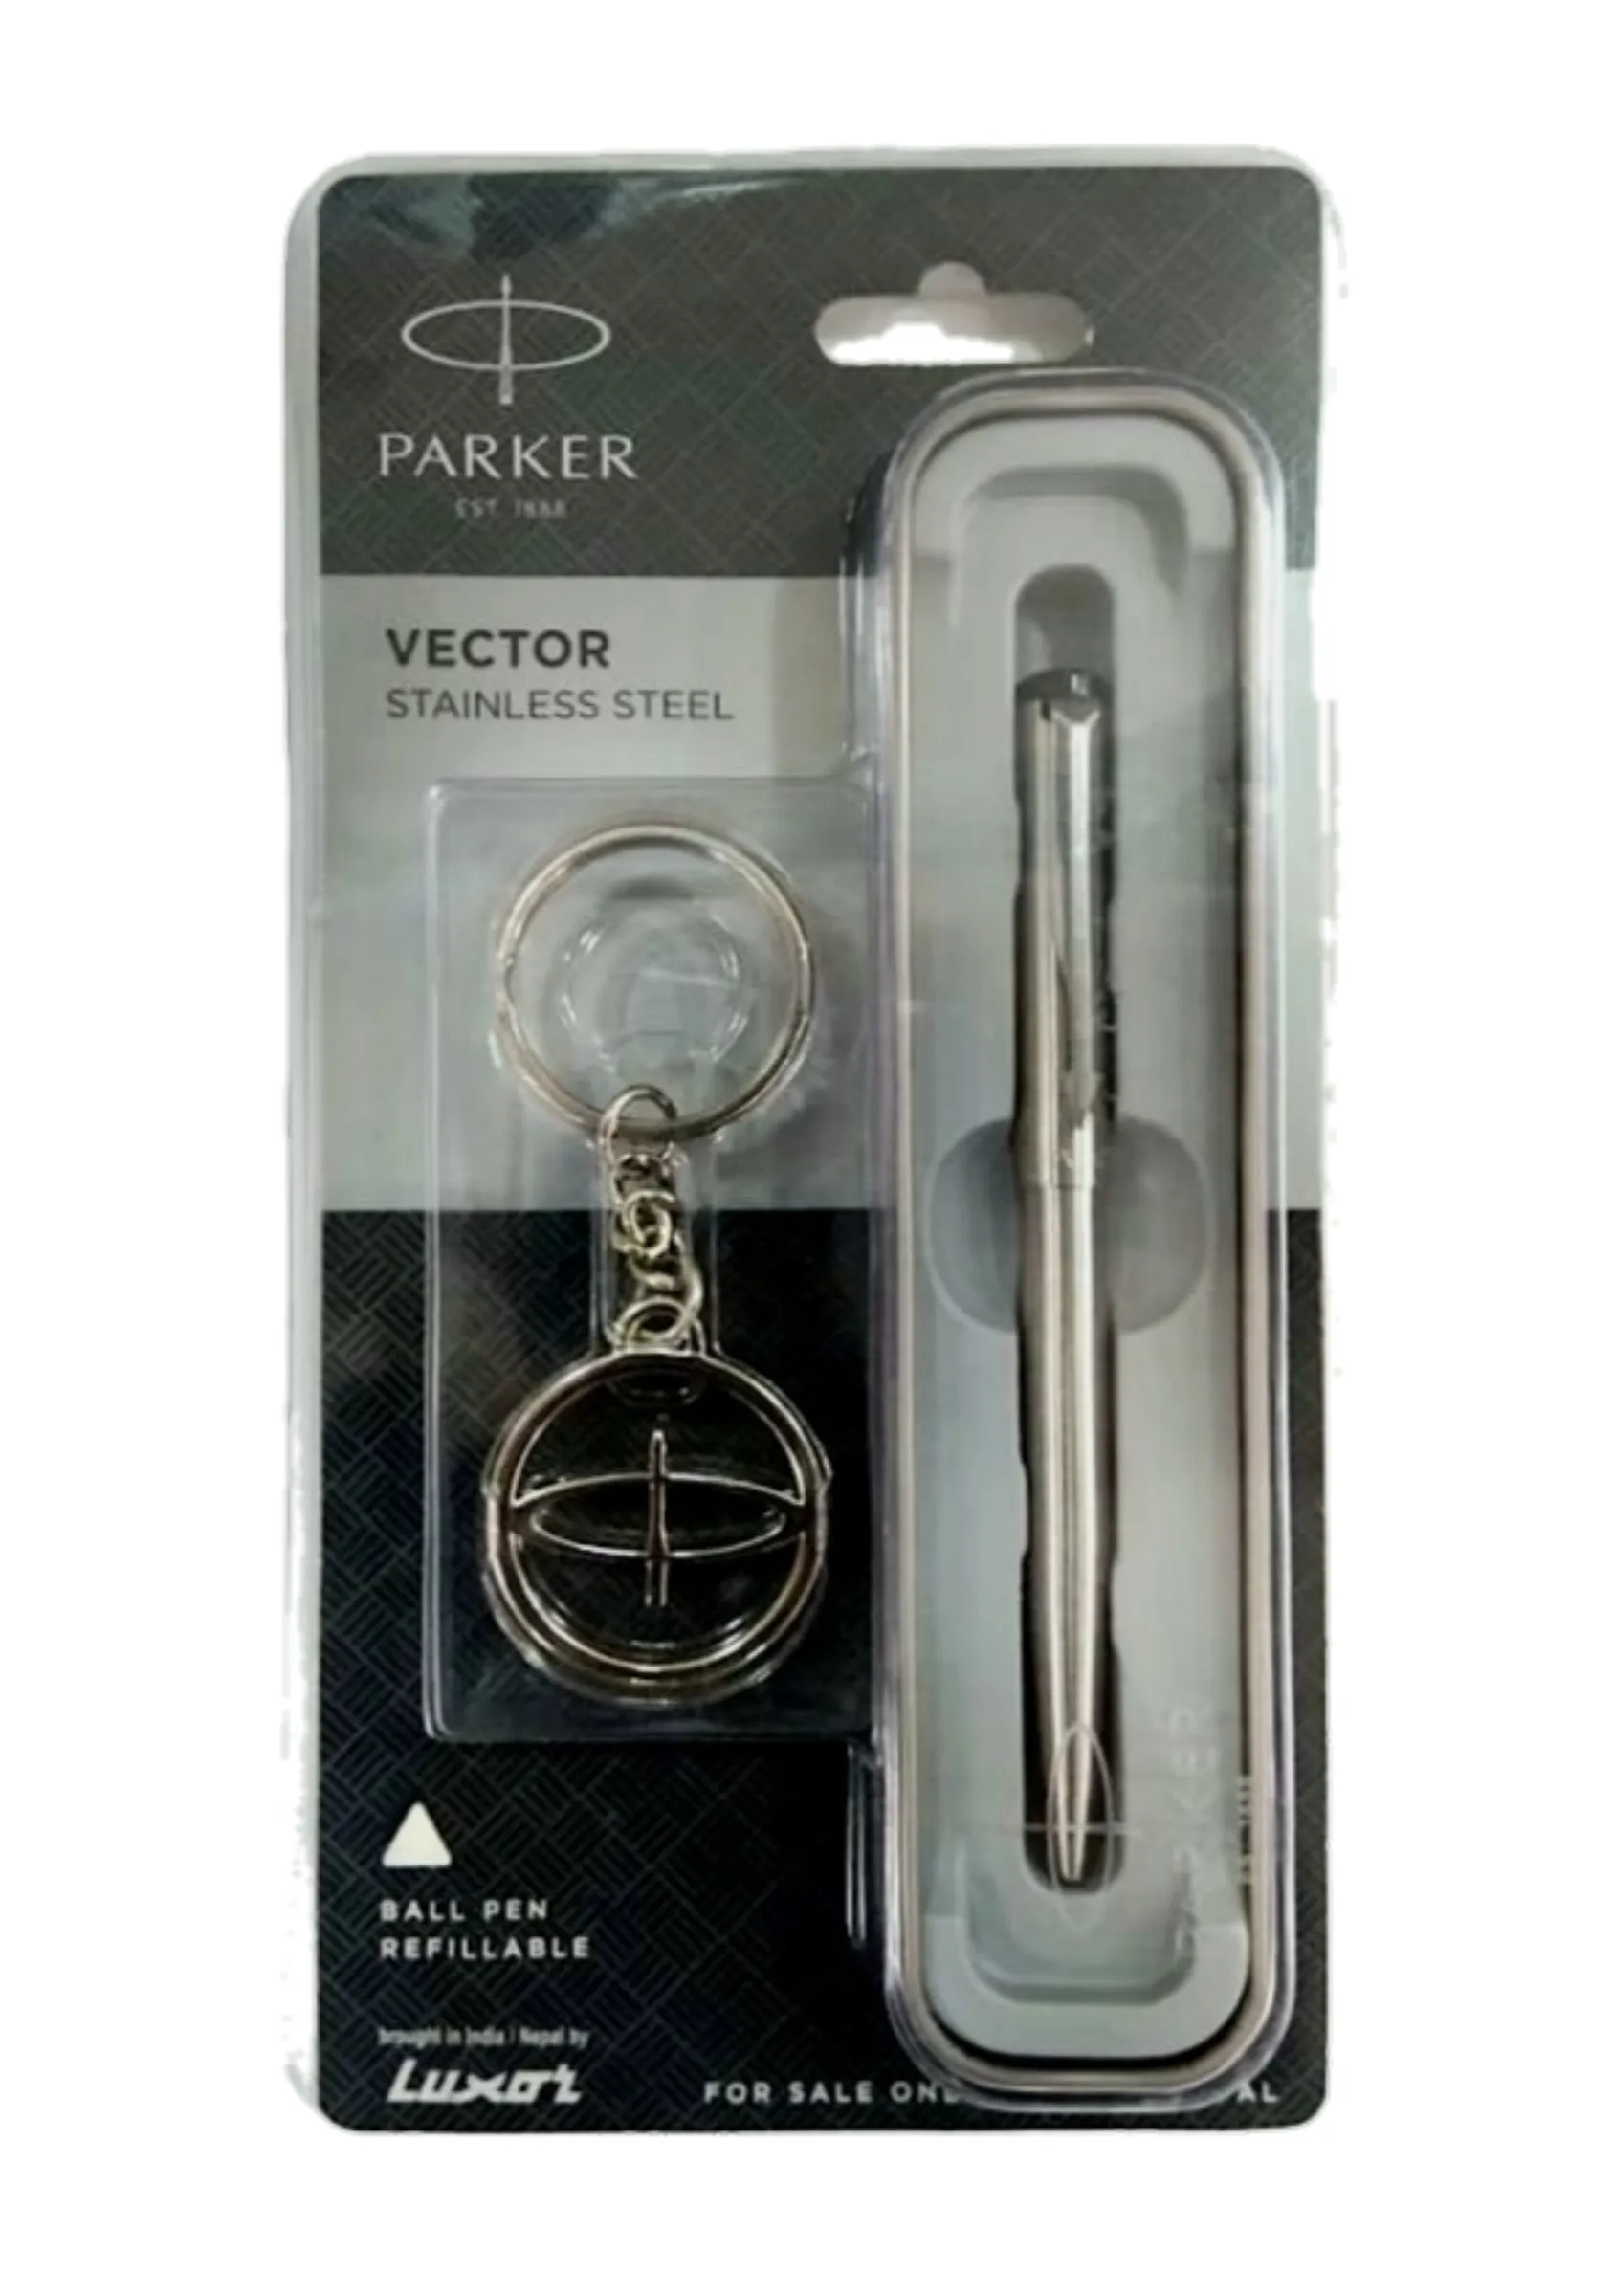 Parker Vector Stainless steel Chrome Trim Ball Pen + Free Key Chain (Pack of 1)